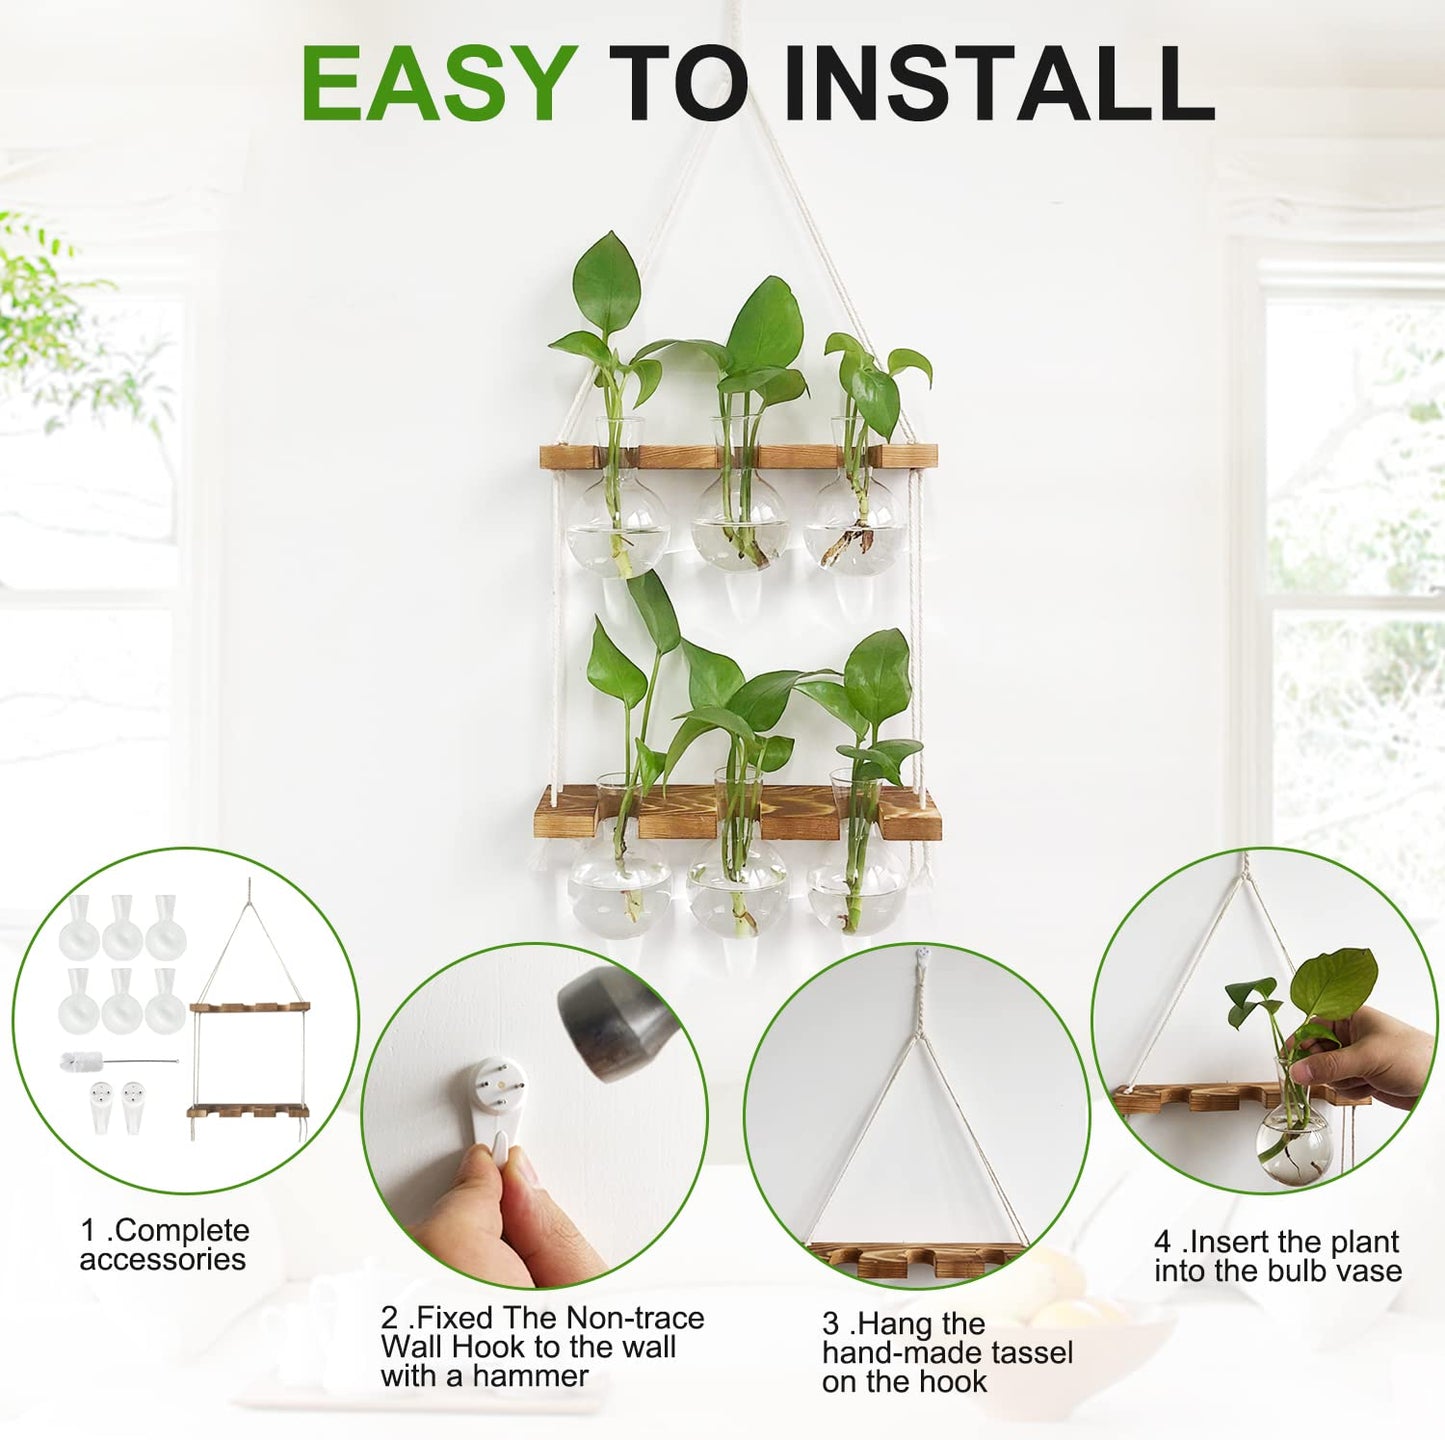 Renmxj Plant Propagation Station Wall Hanging, Plant Terrarium with 2 Tiered Wooden Stand for Hydroponics Plants, Unique Gardening for Women Mom Plant Lovers - 6 Bulb Glass Vases